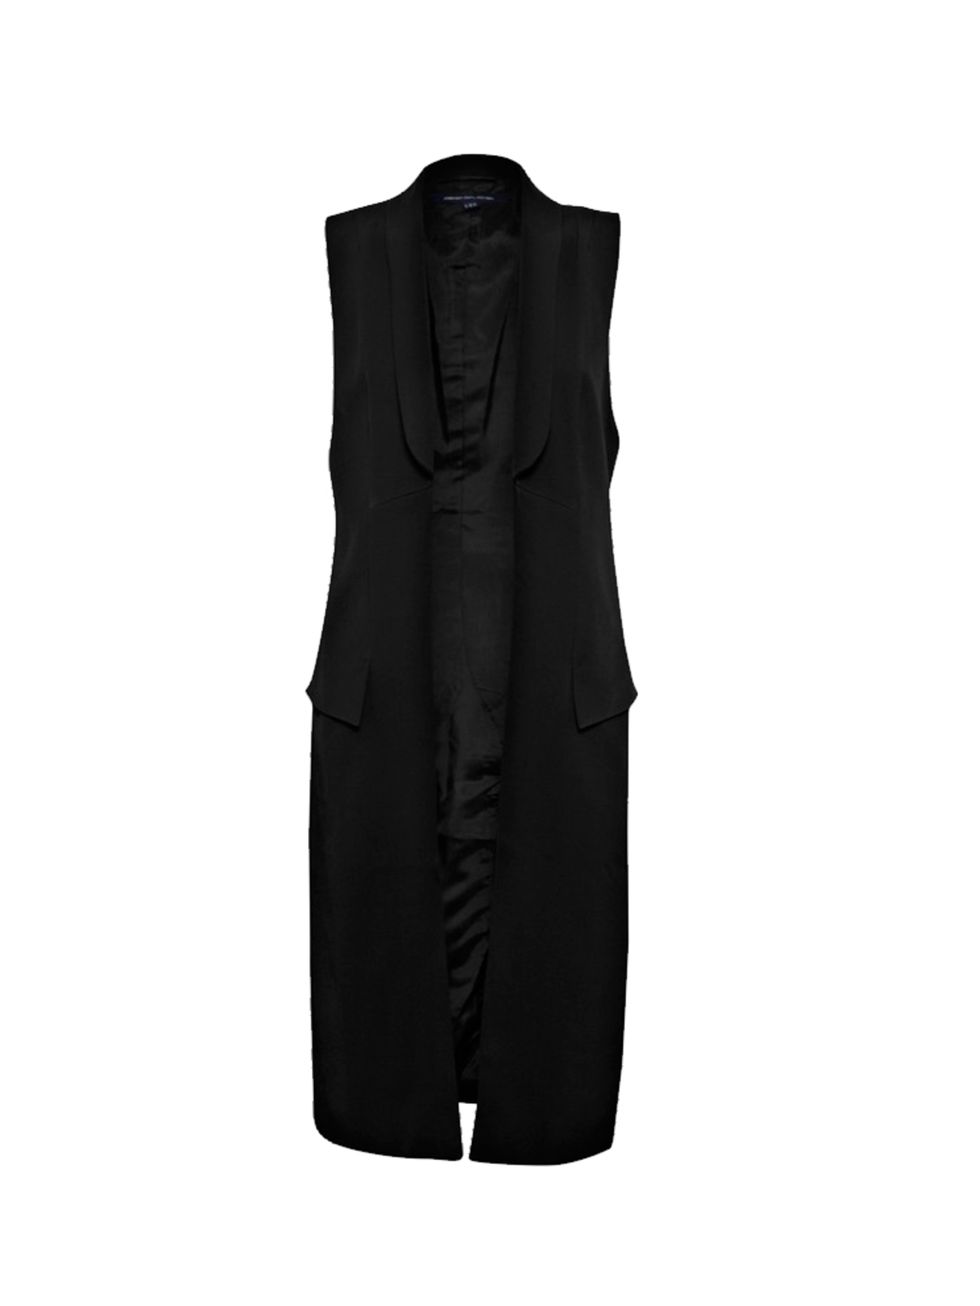 <p><a href="http://www.frenchconnection.com/product/Woman+New+In/70DAC/Deco+Dream+Sleeveless+Coat.htm" target="_blank">French Connection</a> black sleeveless coat, £150</p>